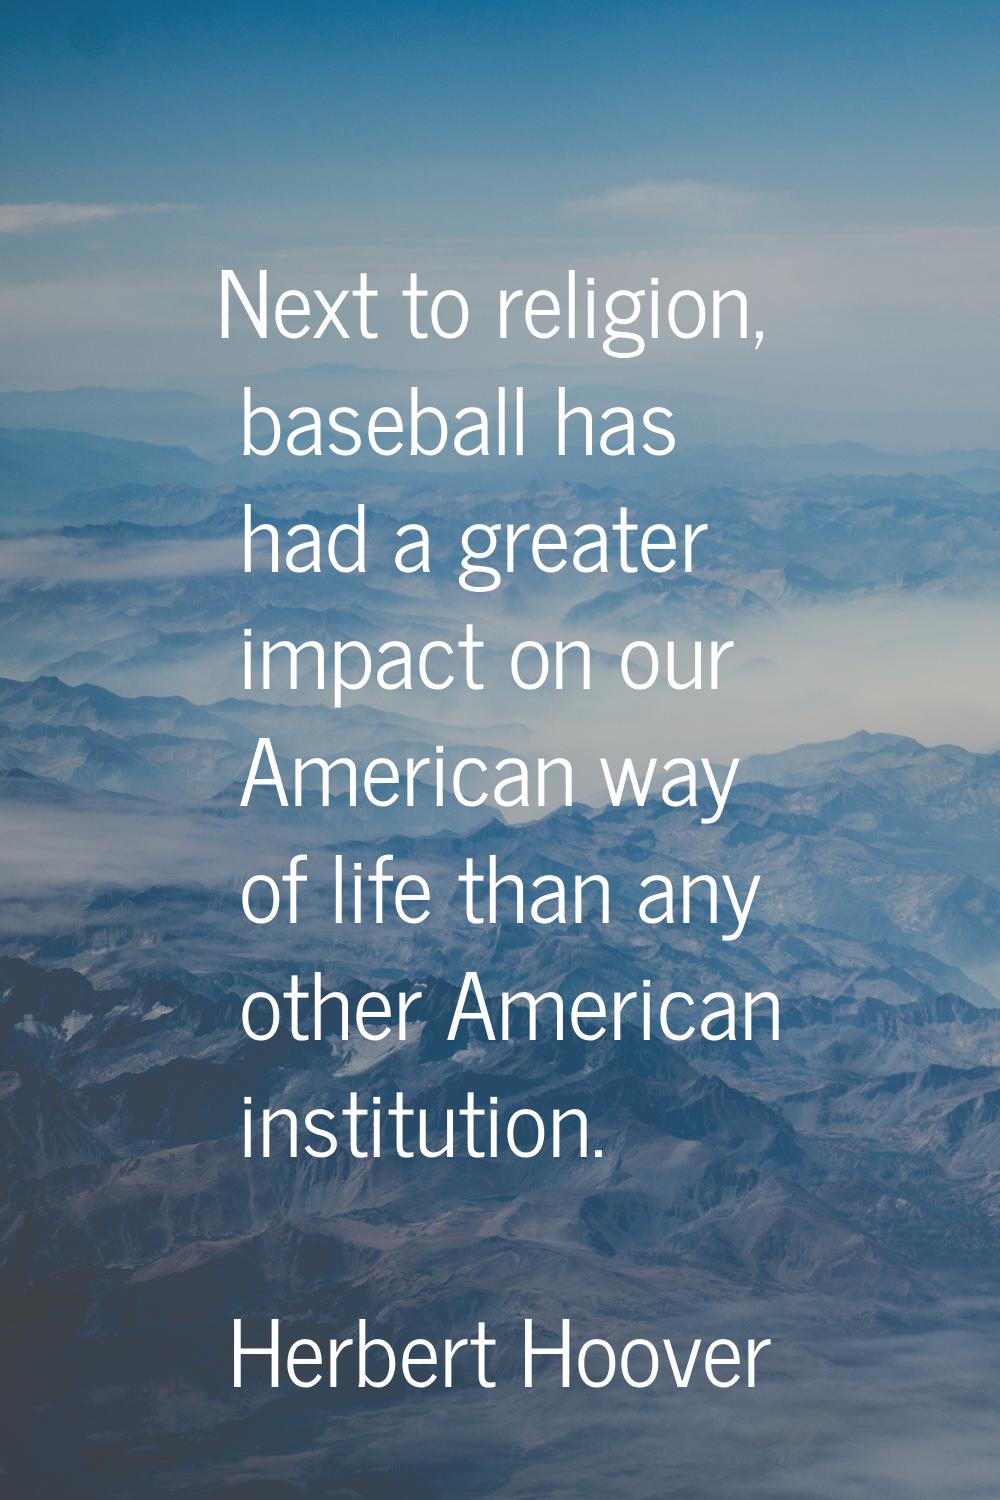 Next to religion, baseball has had a greater impact on our American way of life than any other Amer